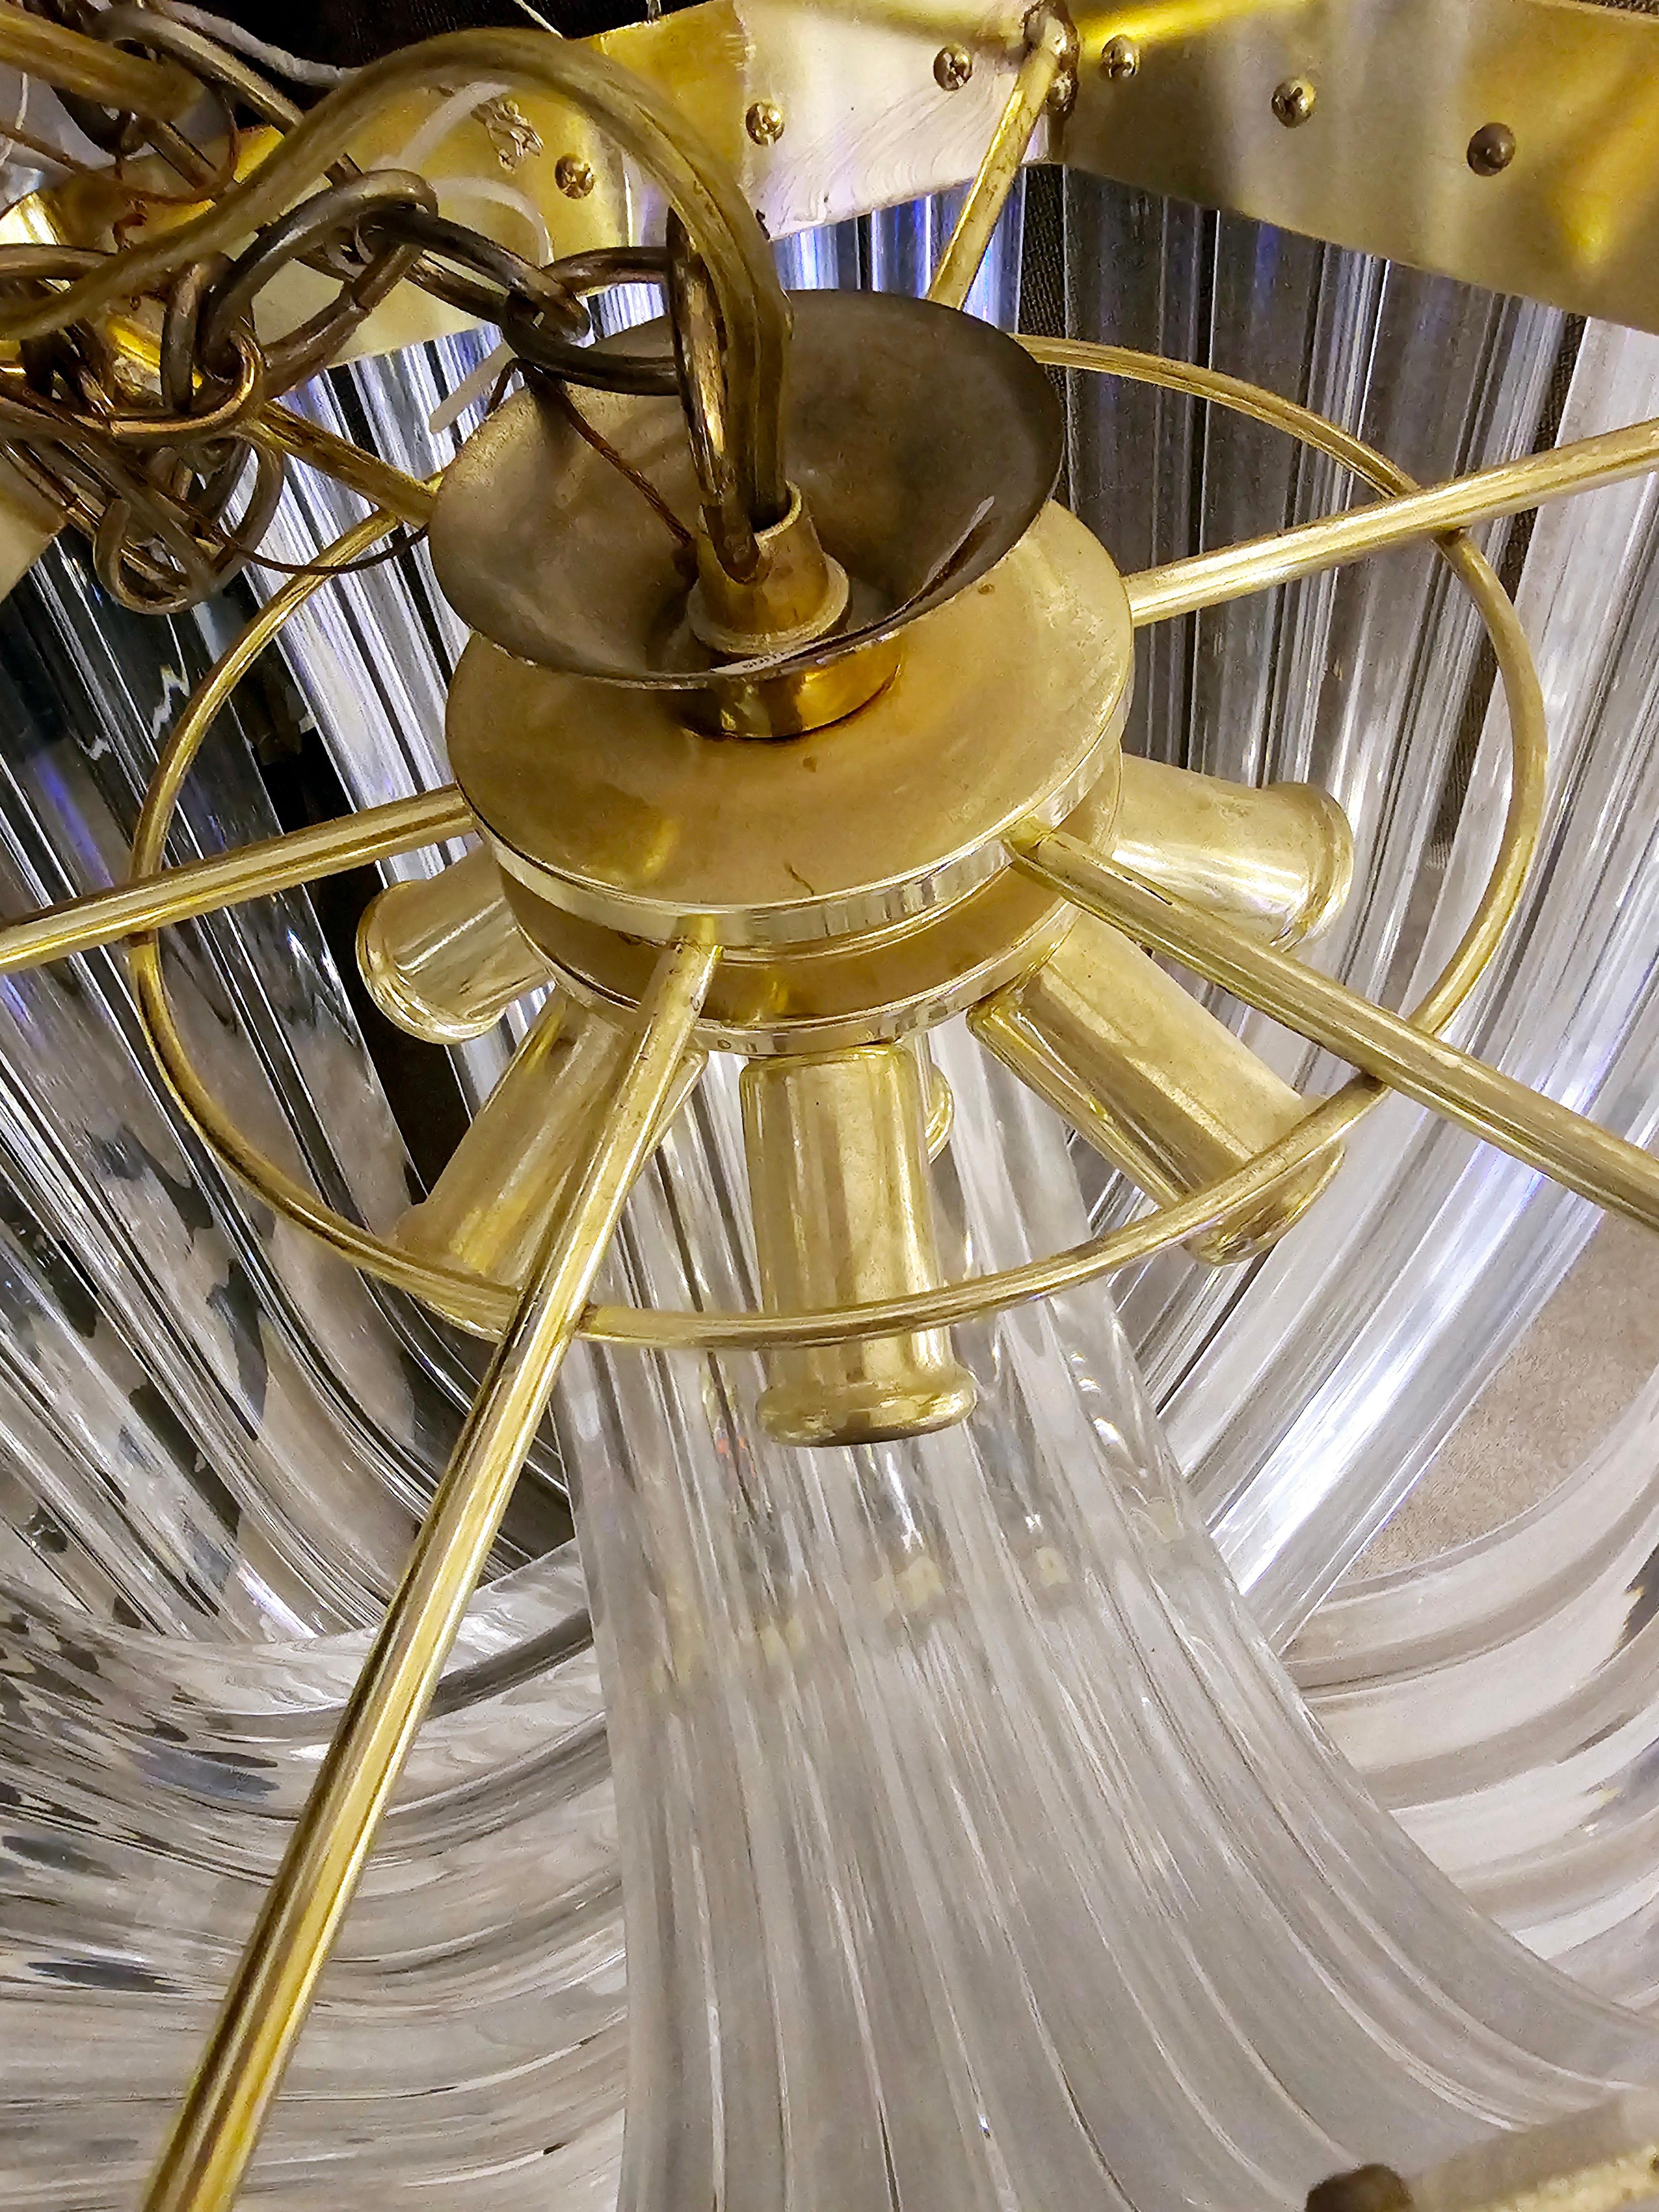 Exceptional extra large vintage Hollywood regency gold lucite ribbon loop chandelier. In the style of Carlo Nason this curved clear lucite prism chandelier is jaw dropping.
Looking for a lighting fixture that says, 'I'm fun, but also sophisticated?'